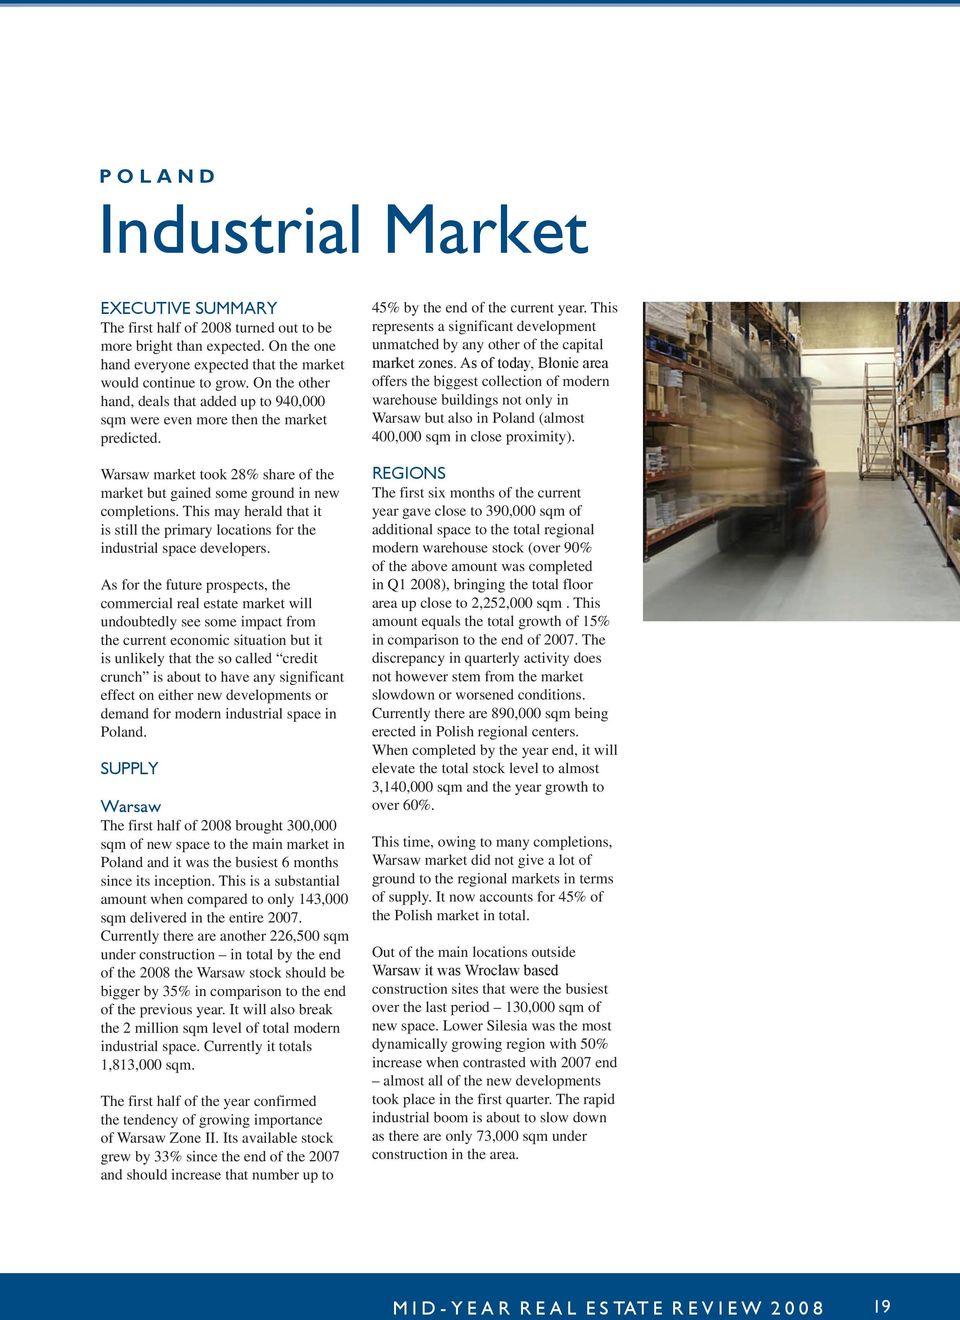 This may herald that it is still the primary locations for the industrial space developers.